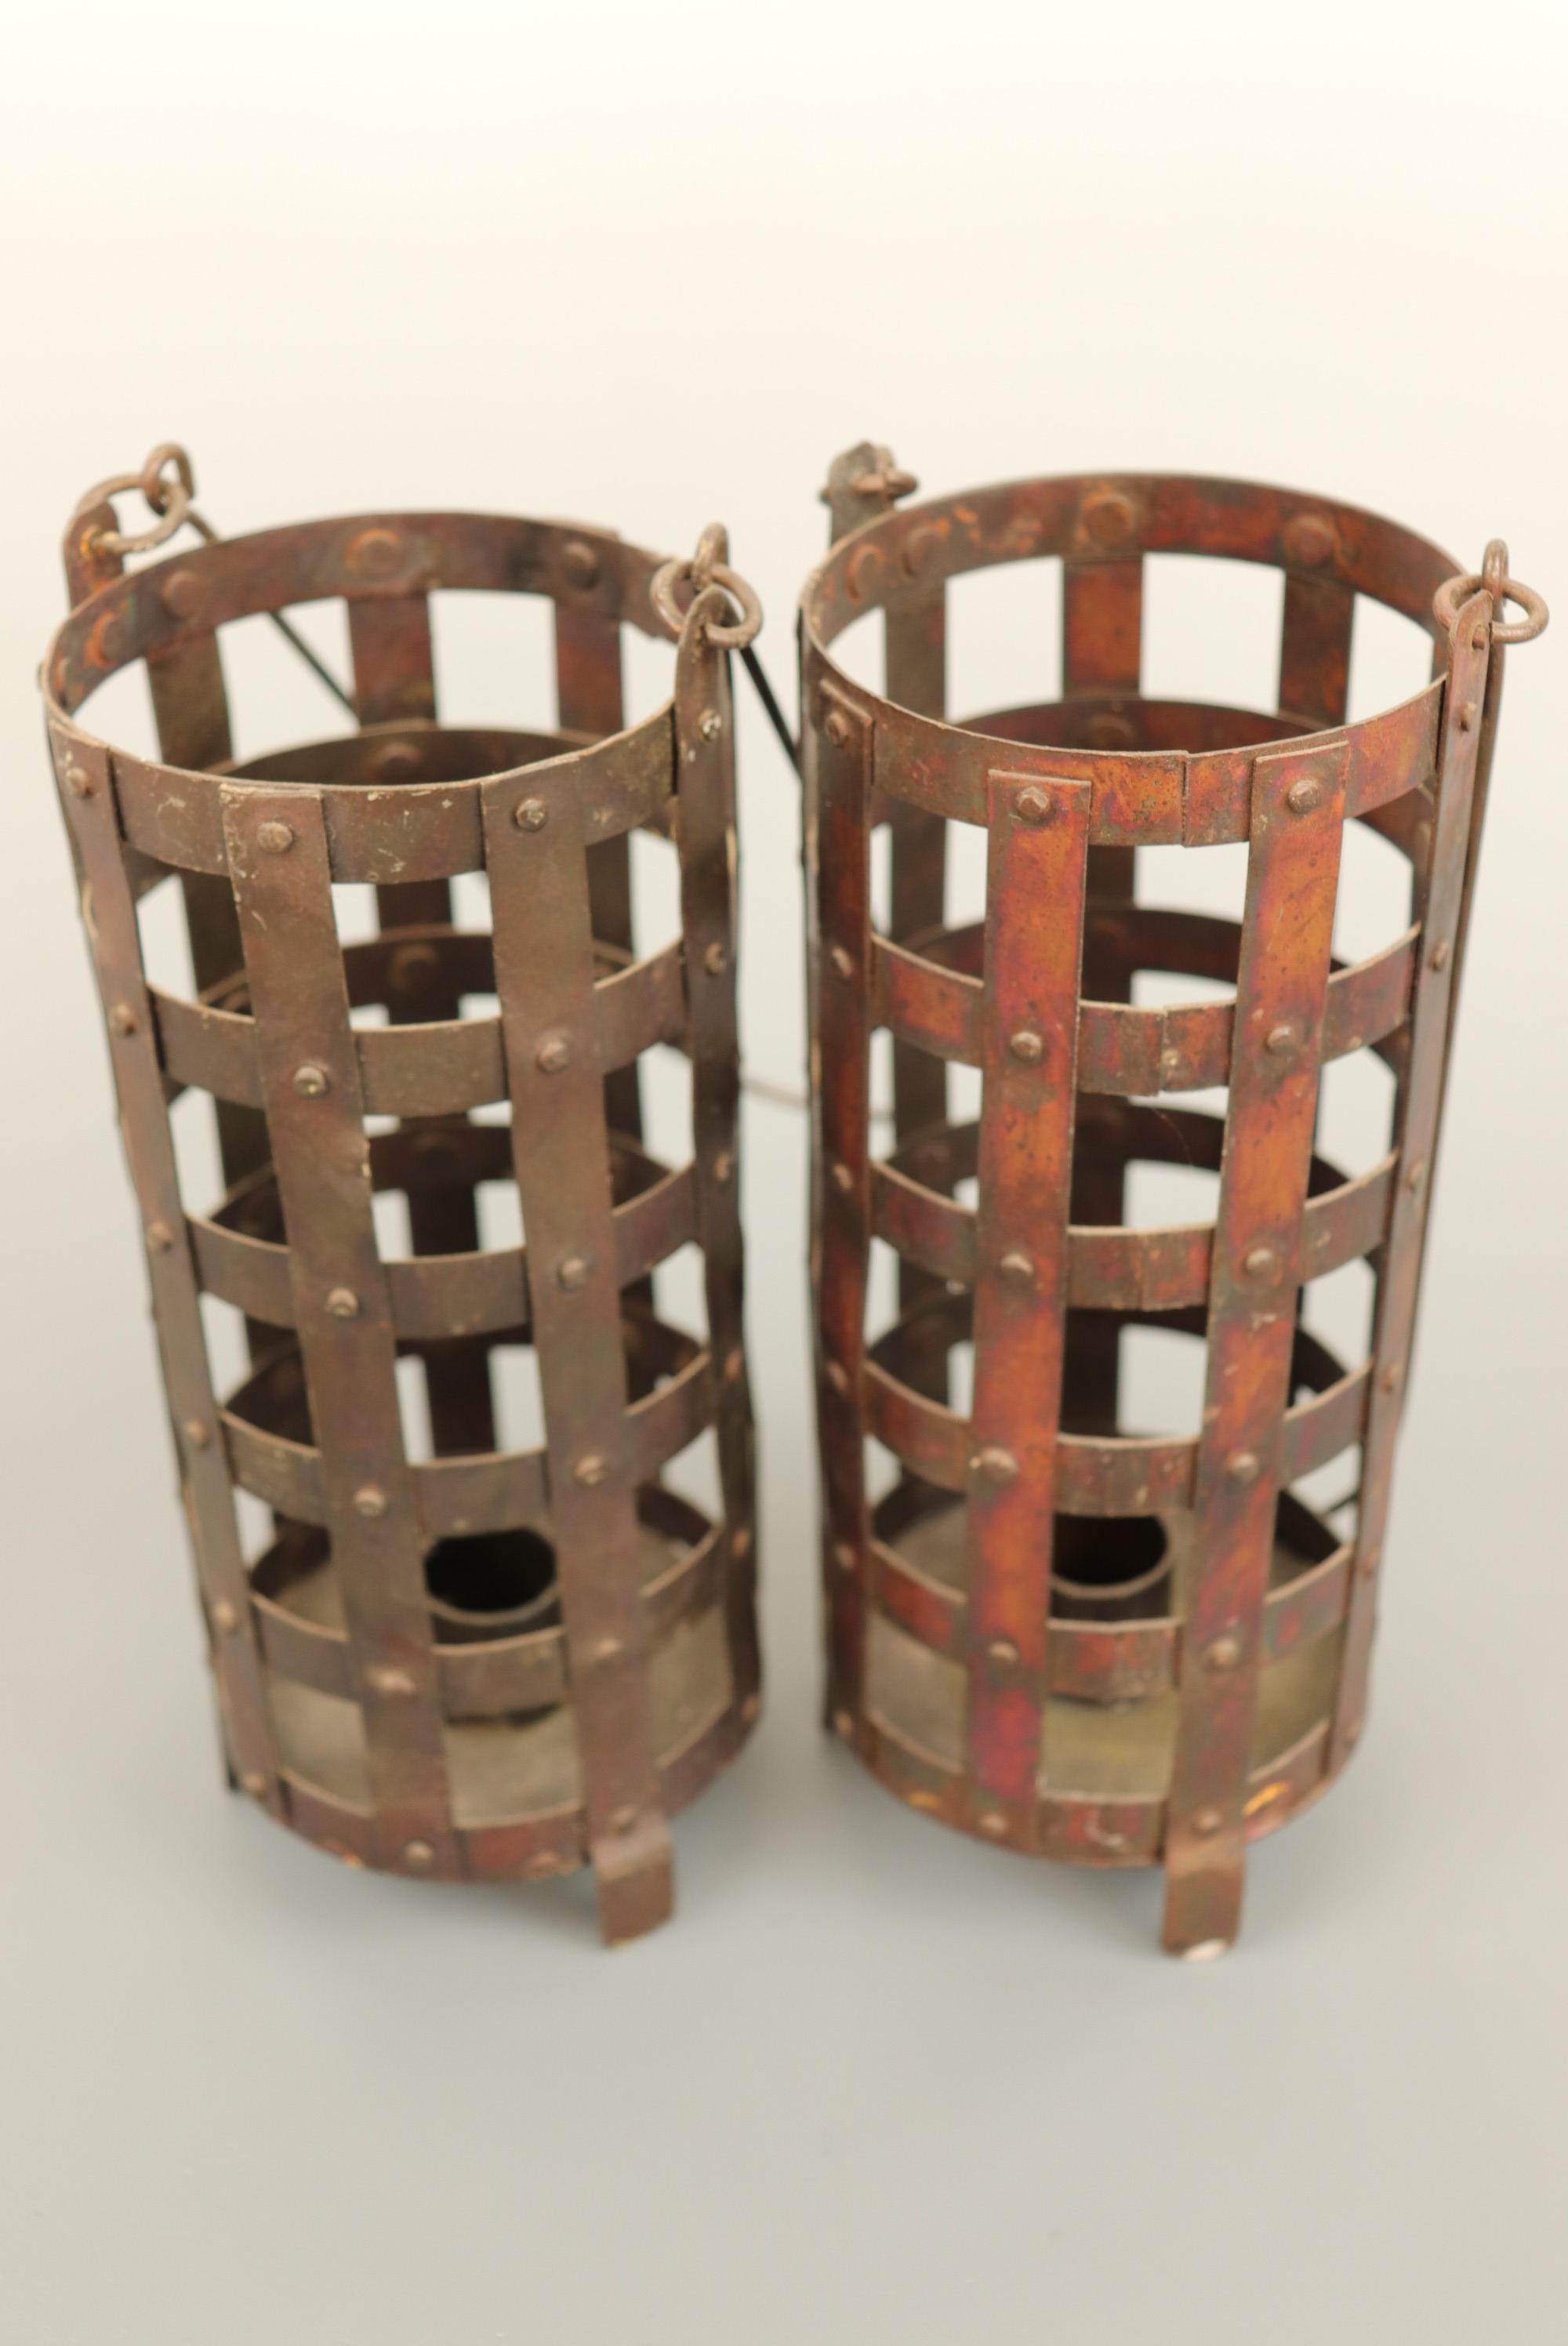 A pair of pendant latticed patinated-iron candle lamps, 20 cm high - Image 2 of 2